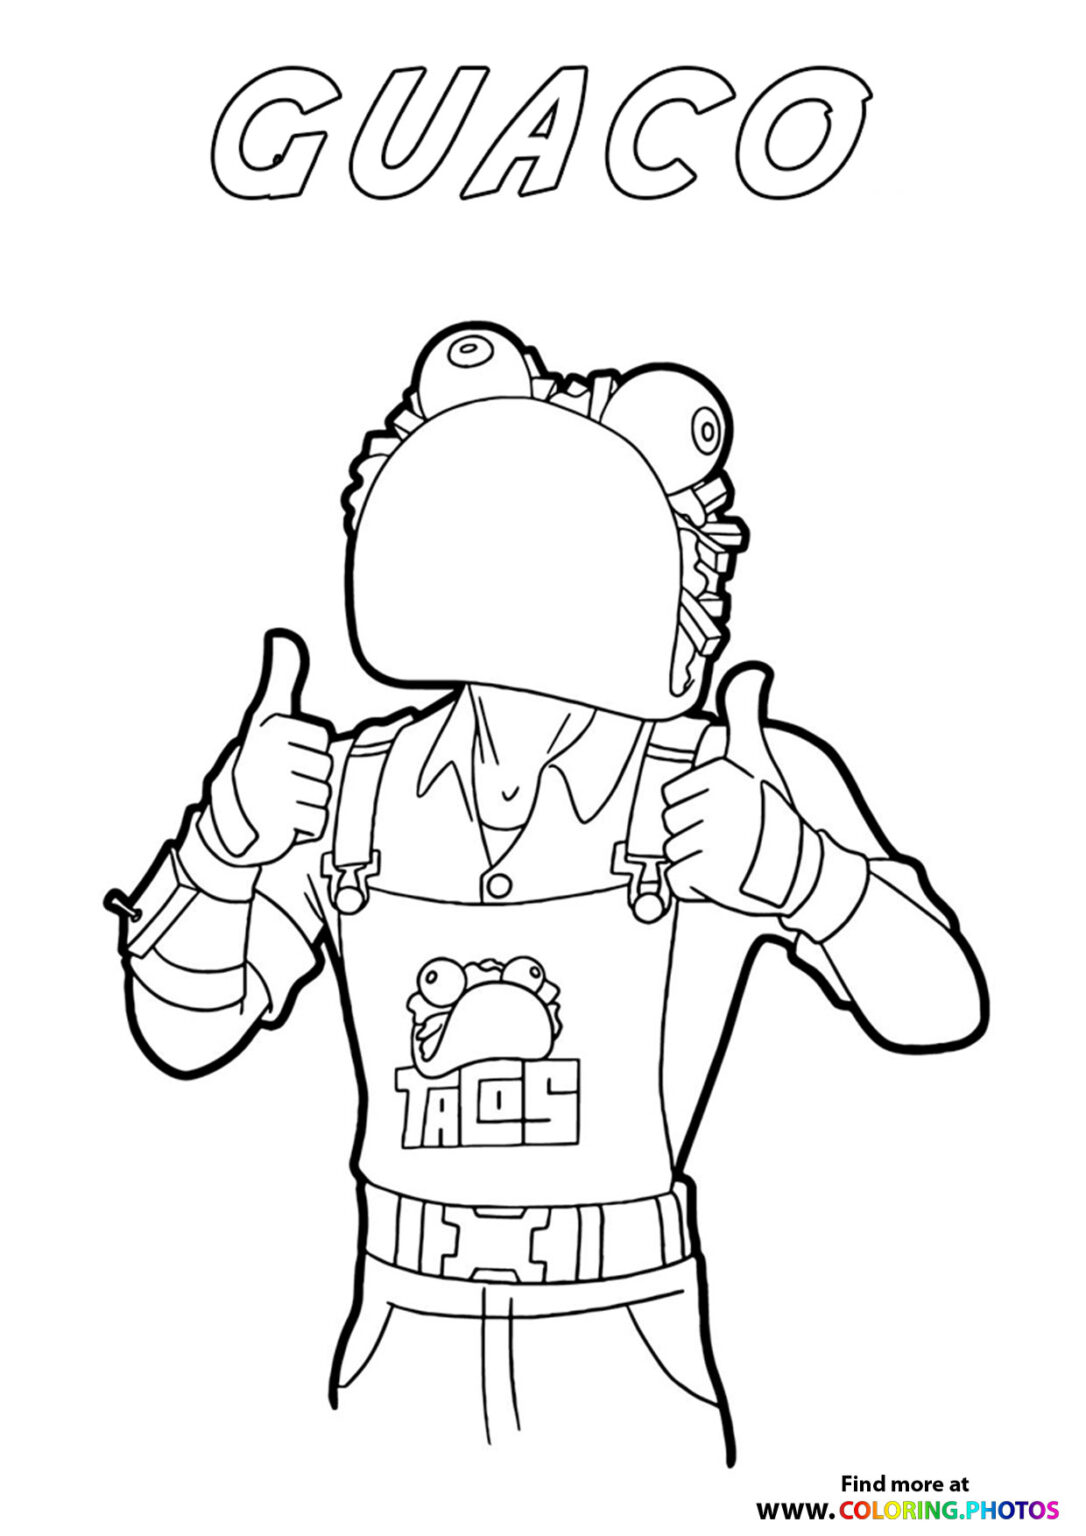 Raven Fortnite Coloring Pages For Kids